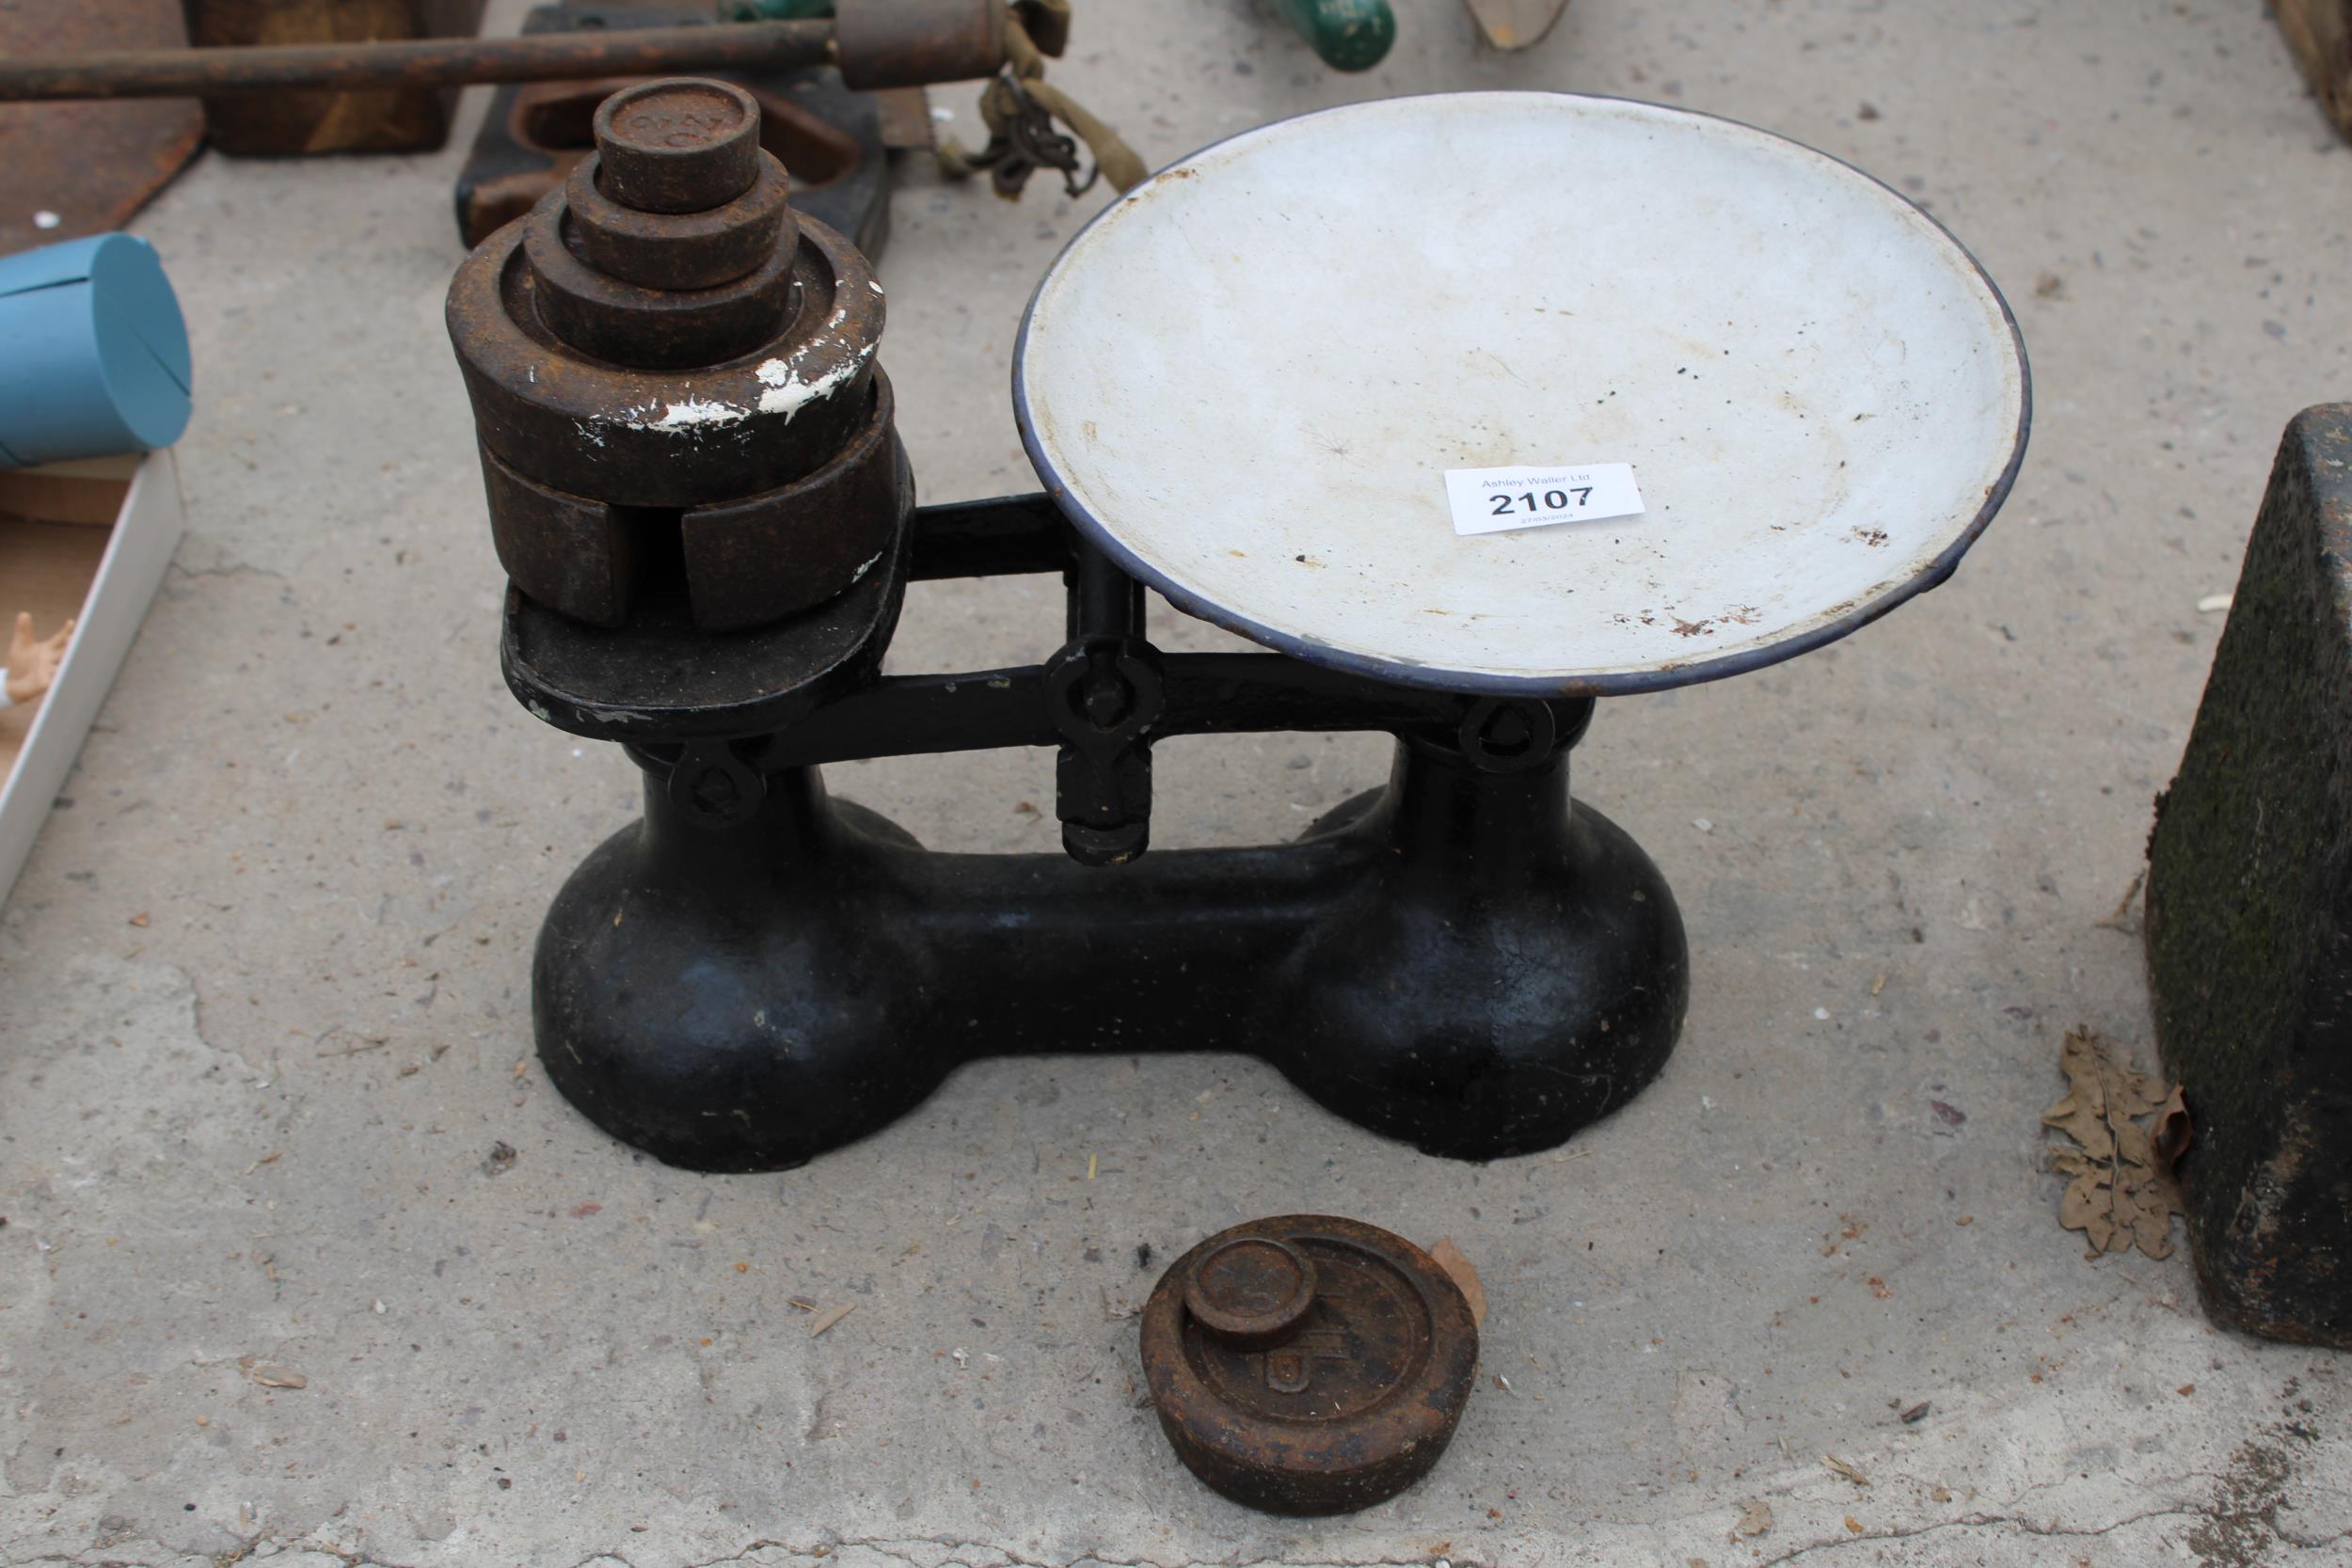 A VINTAGE SET OF BALANCE SCALES WITH WEIGHTS